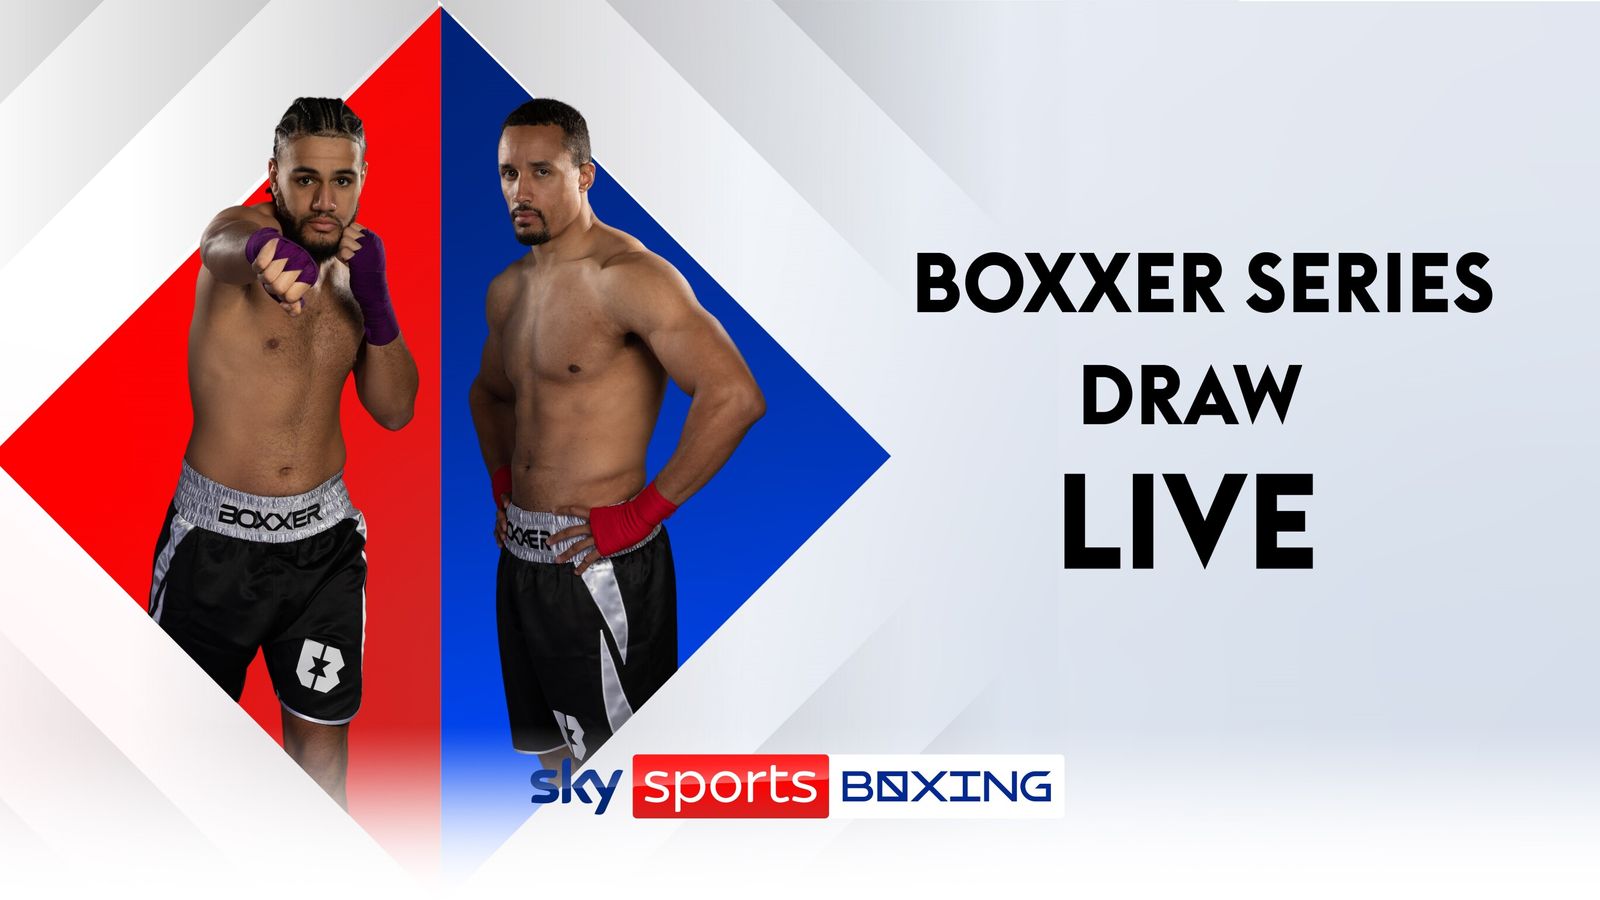 The Boxxer Series cruiserweights will discover their opponents in todays draw